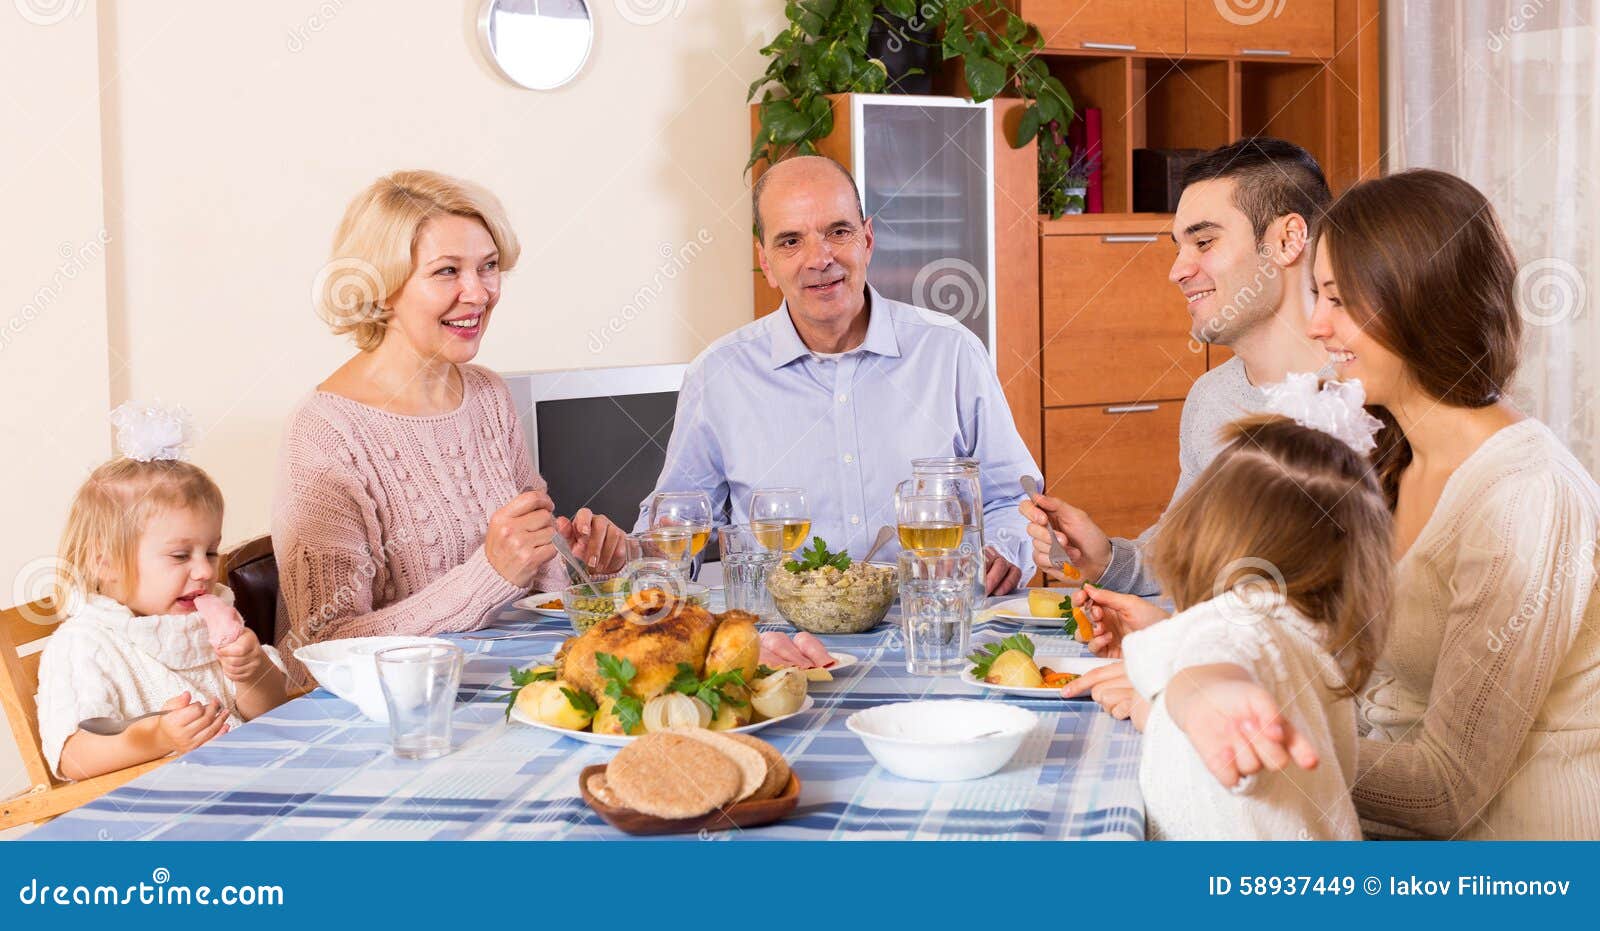 Sunday dinner of family stock image. Image of father - 58937449